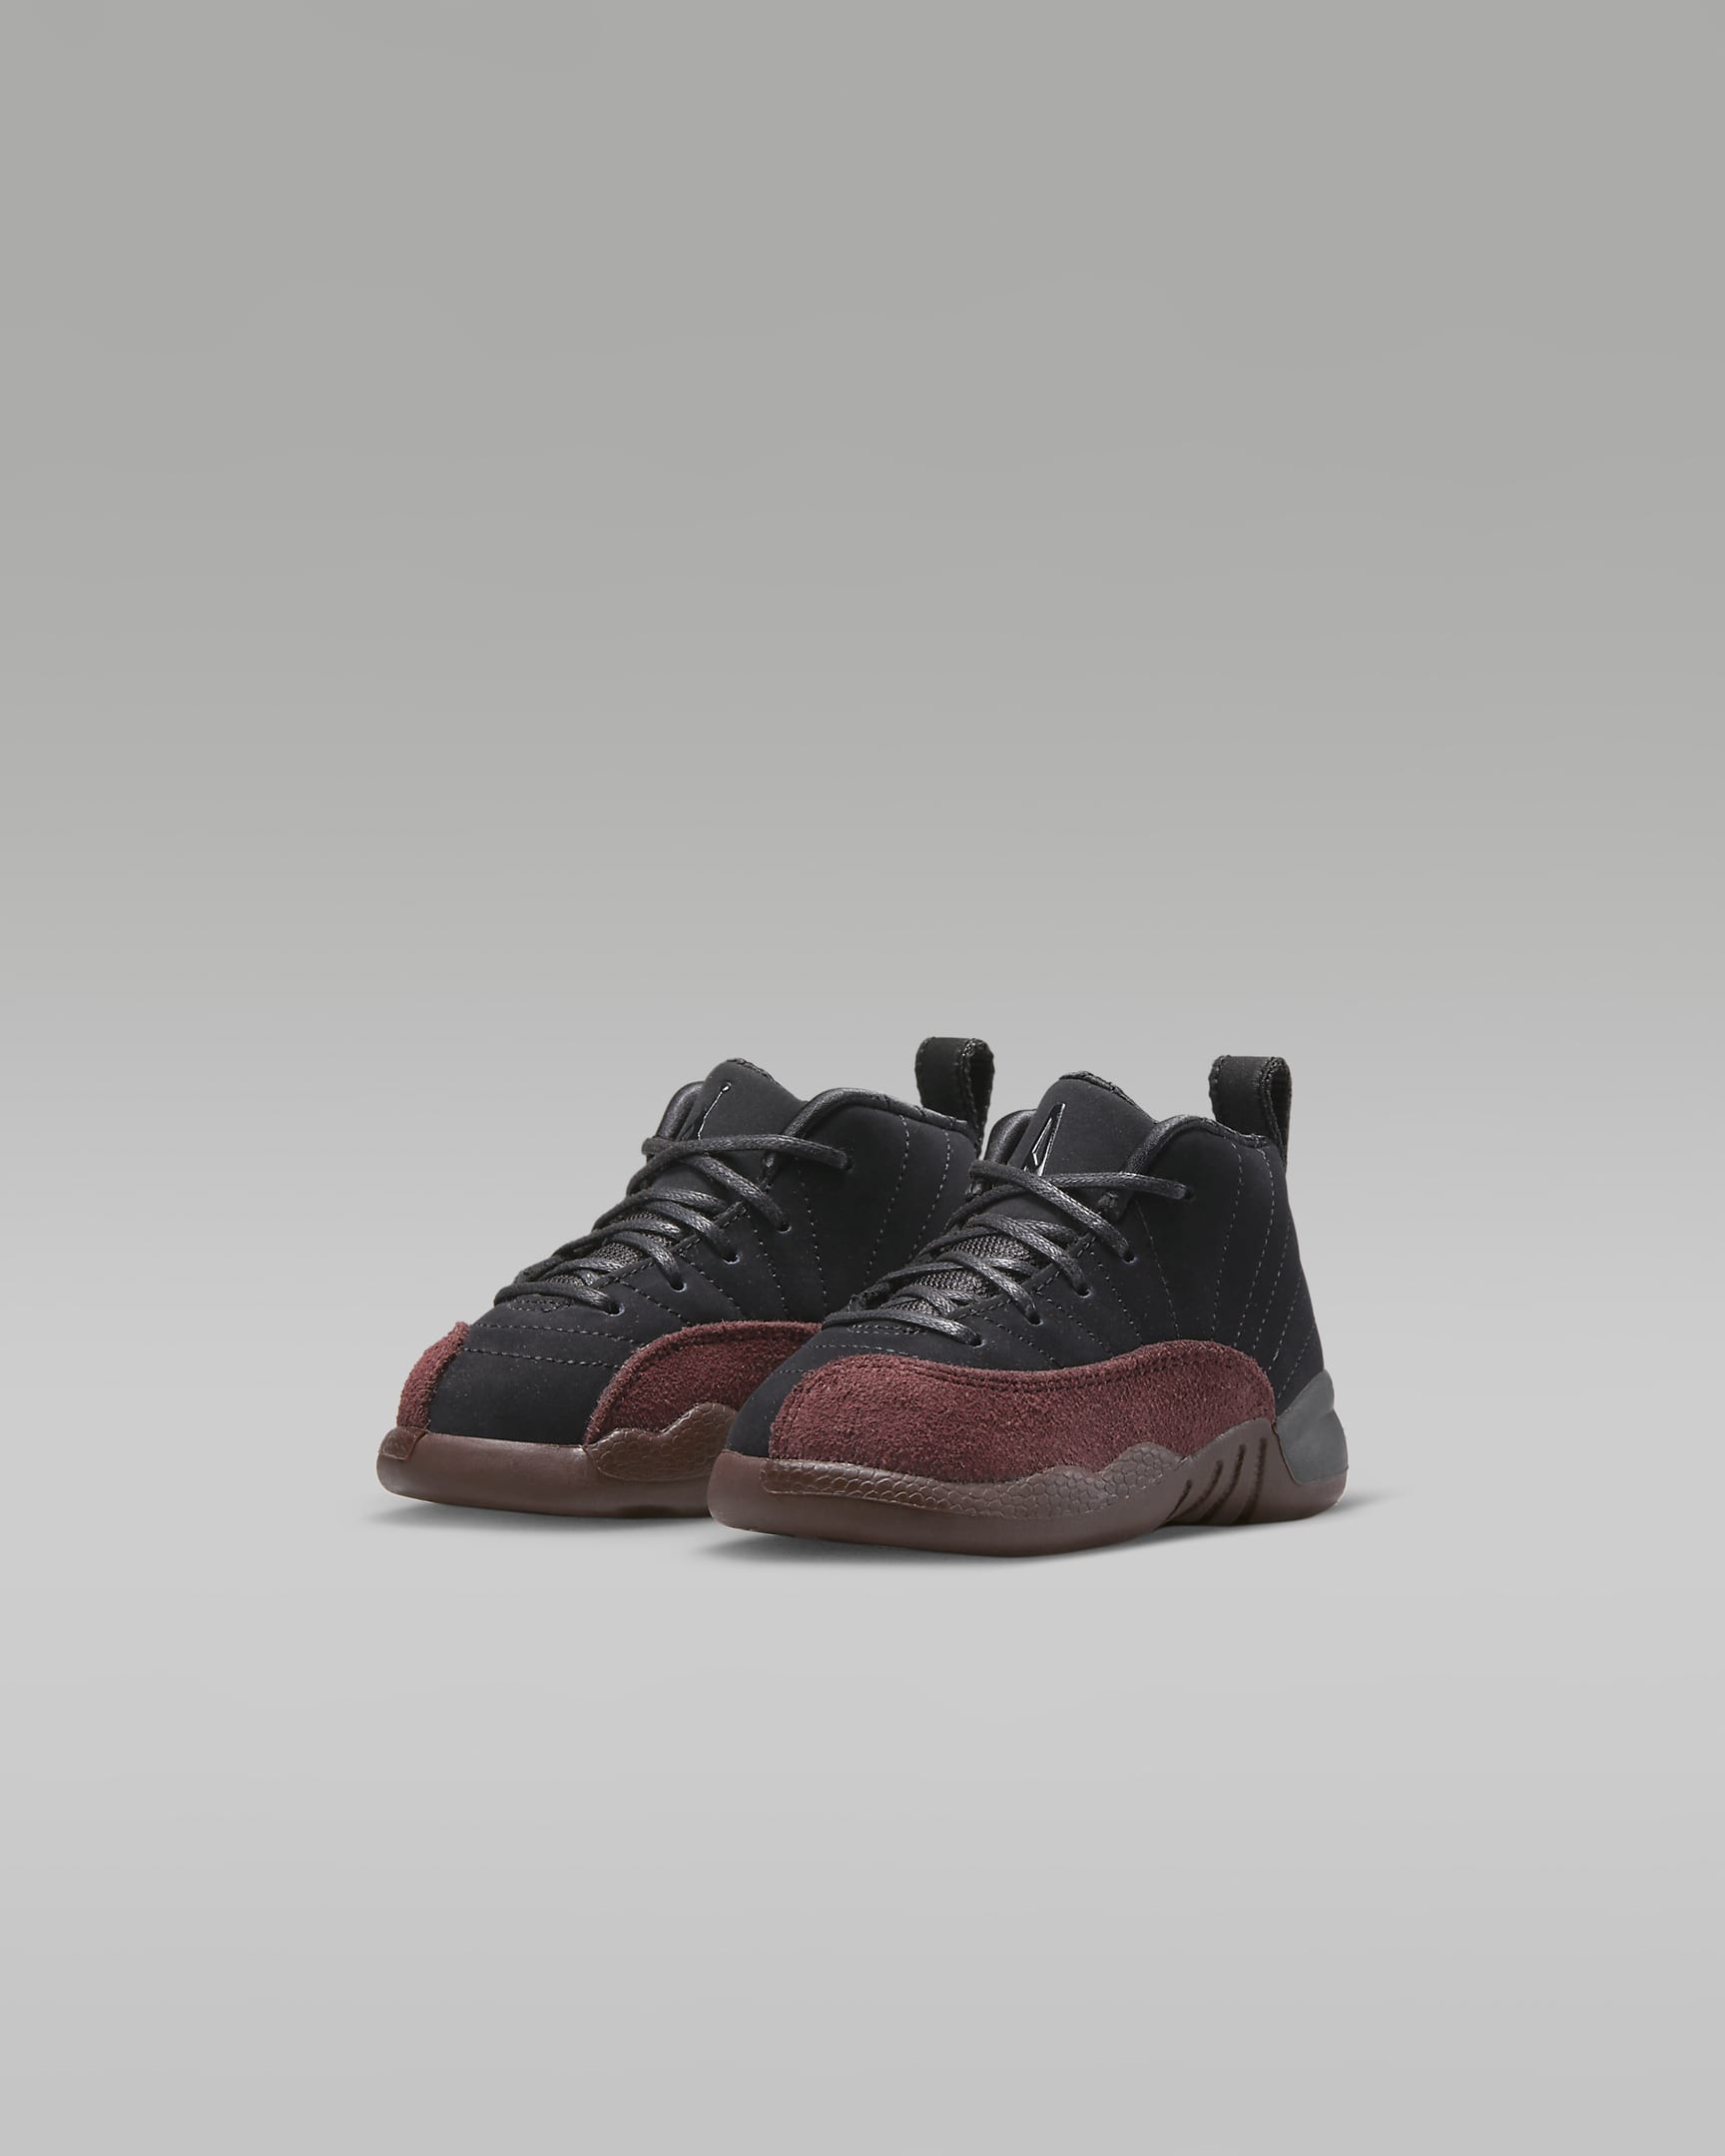 Jordan 12 x A Ma Maniére Baby/Toddler Shoes. Nike ID